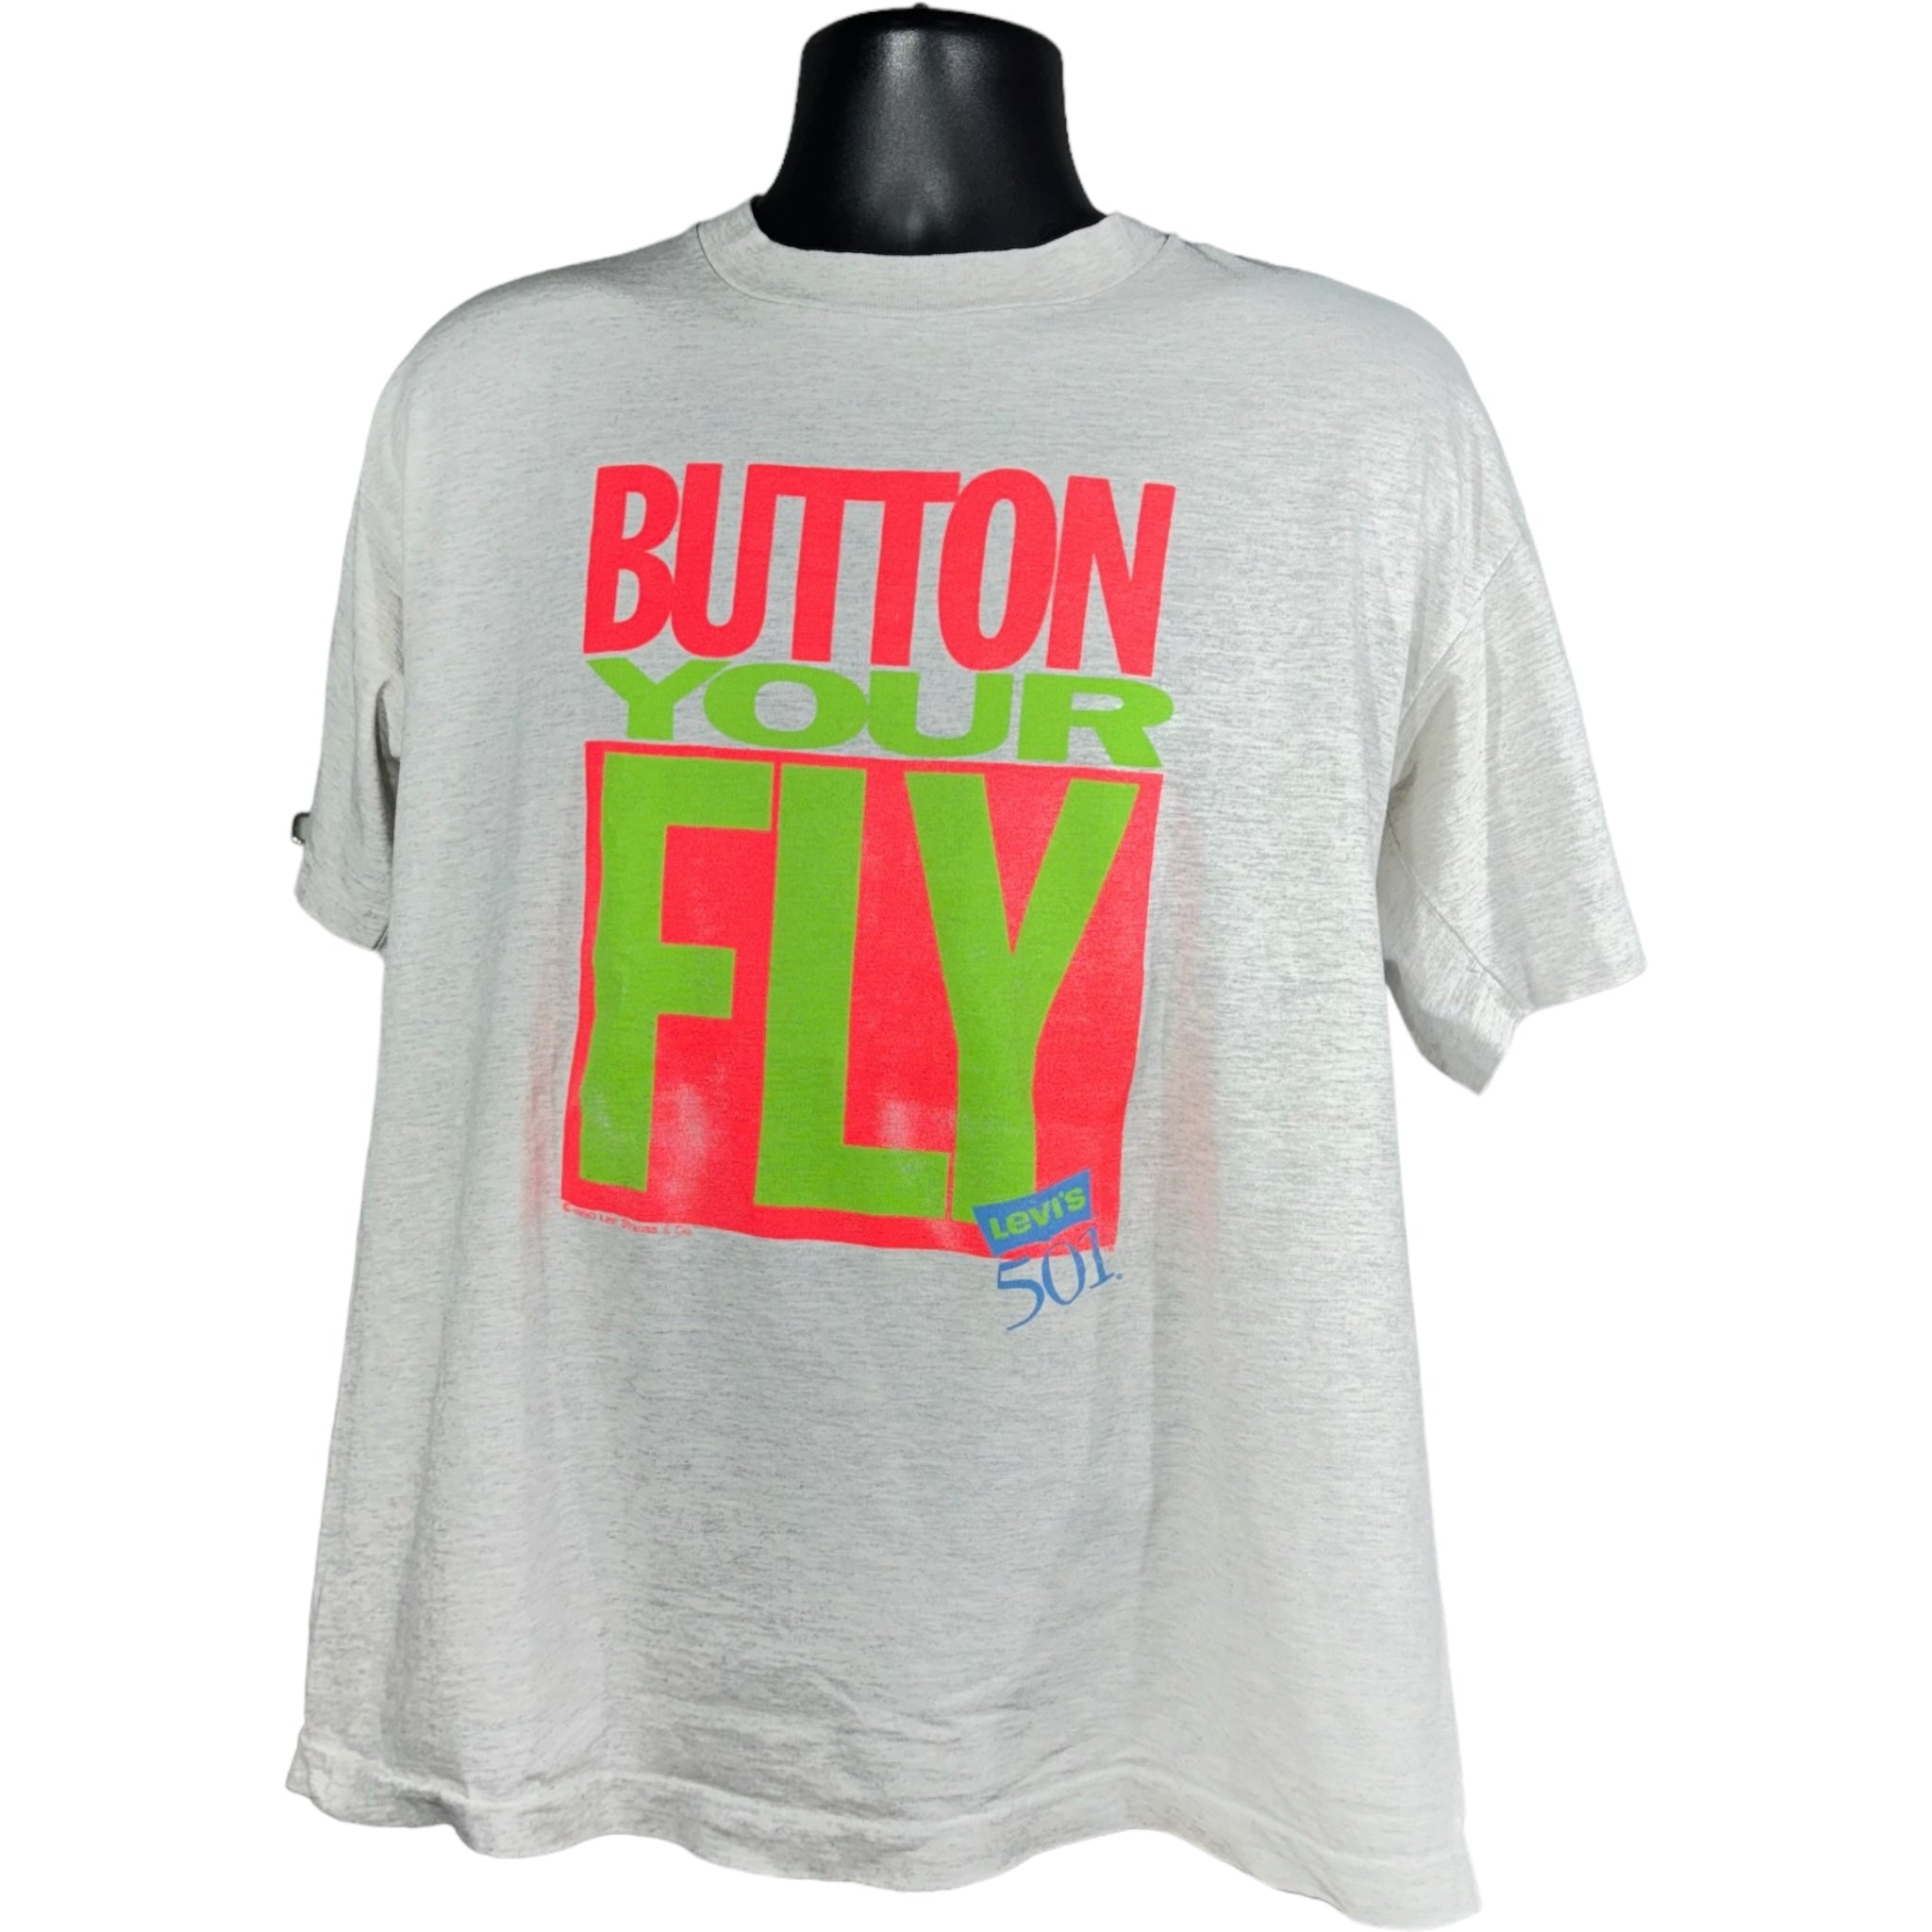 Vintage "Button Your Fly" Levi's 501 Tee 1990